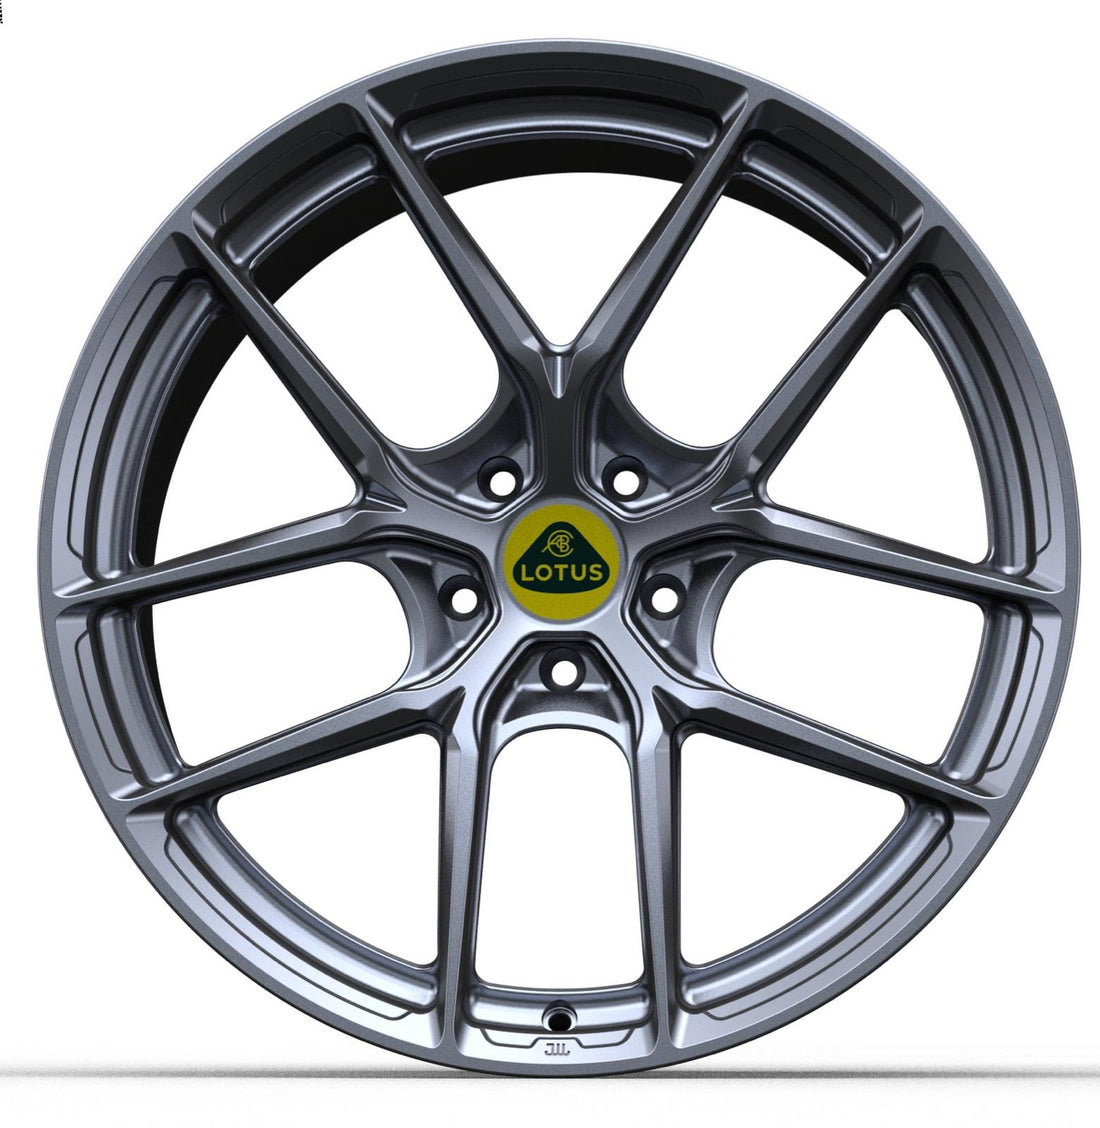 Ensuring Quality and Safety: The JWL Certification and Aerie Performance Lightweight Alloy Forged Wheels